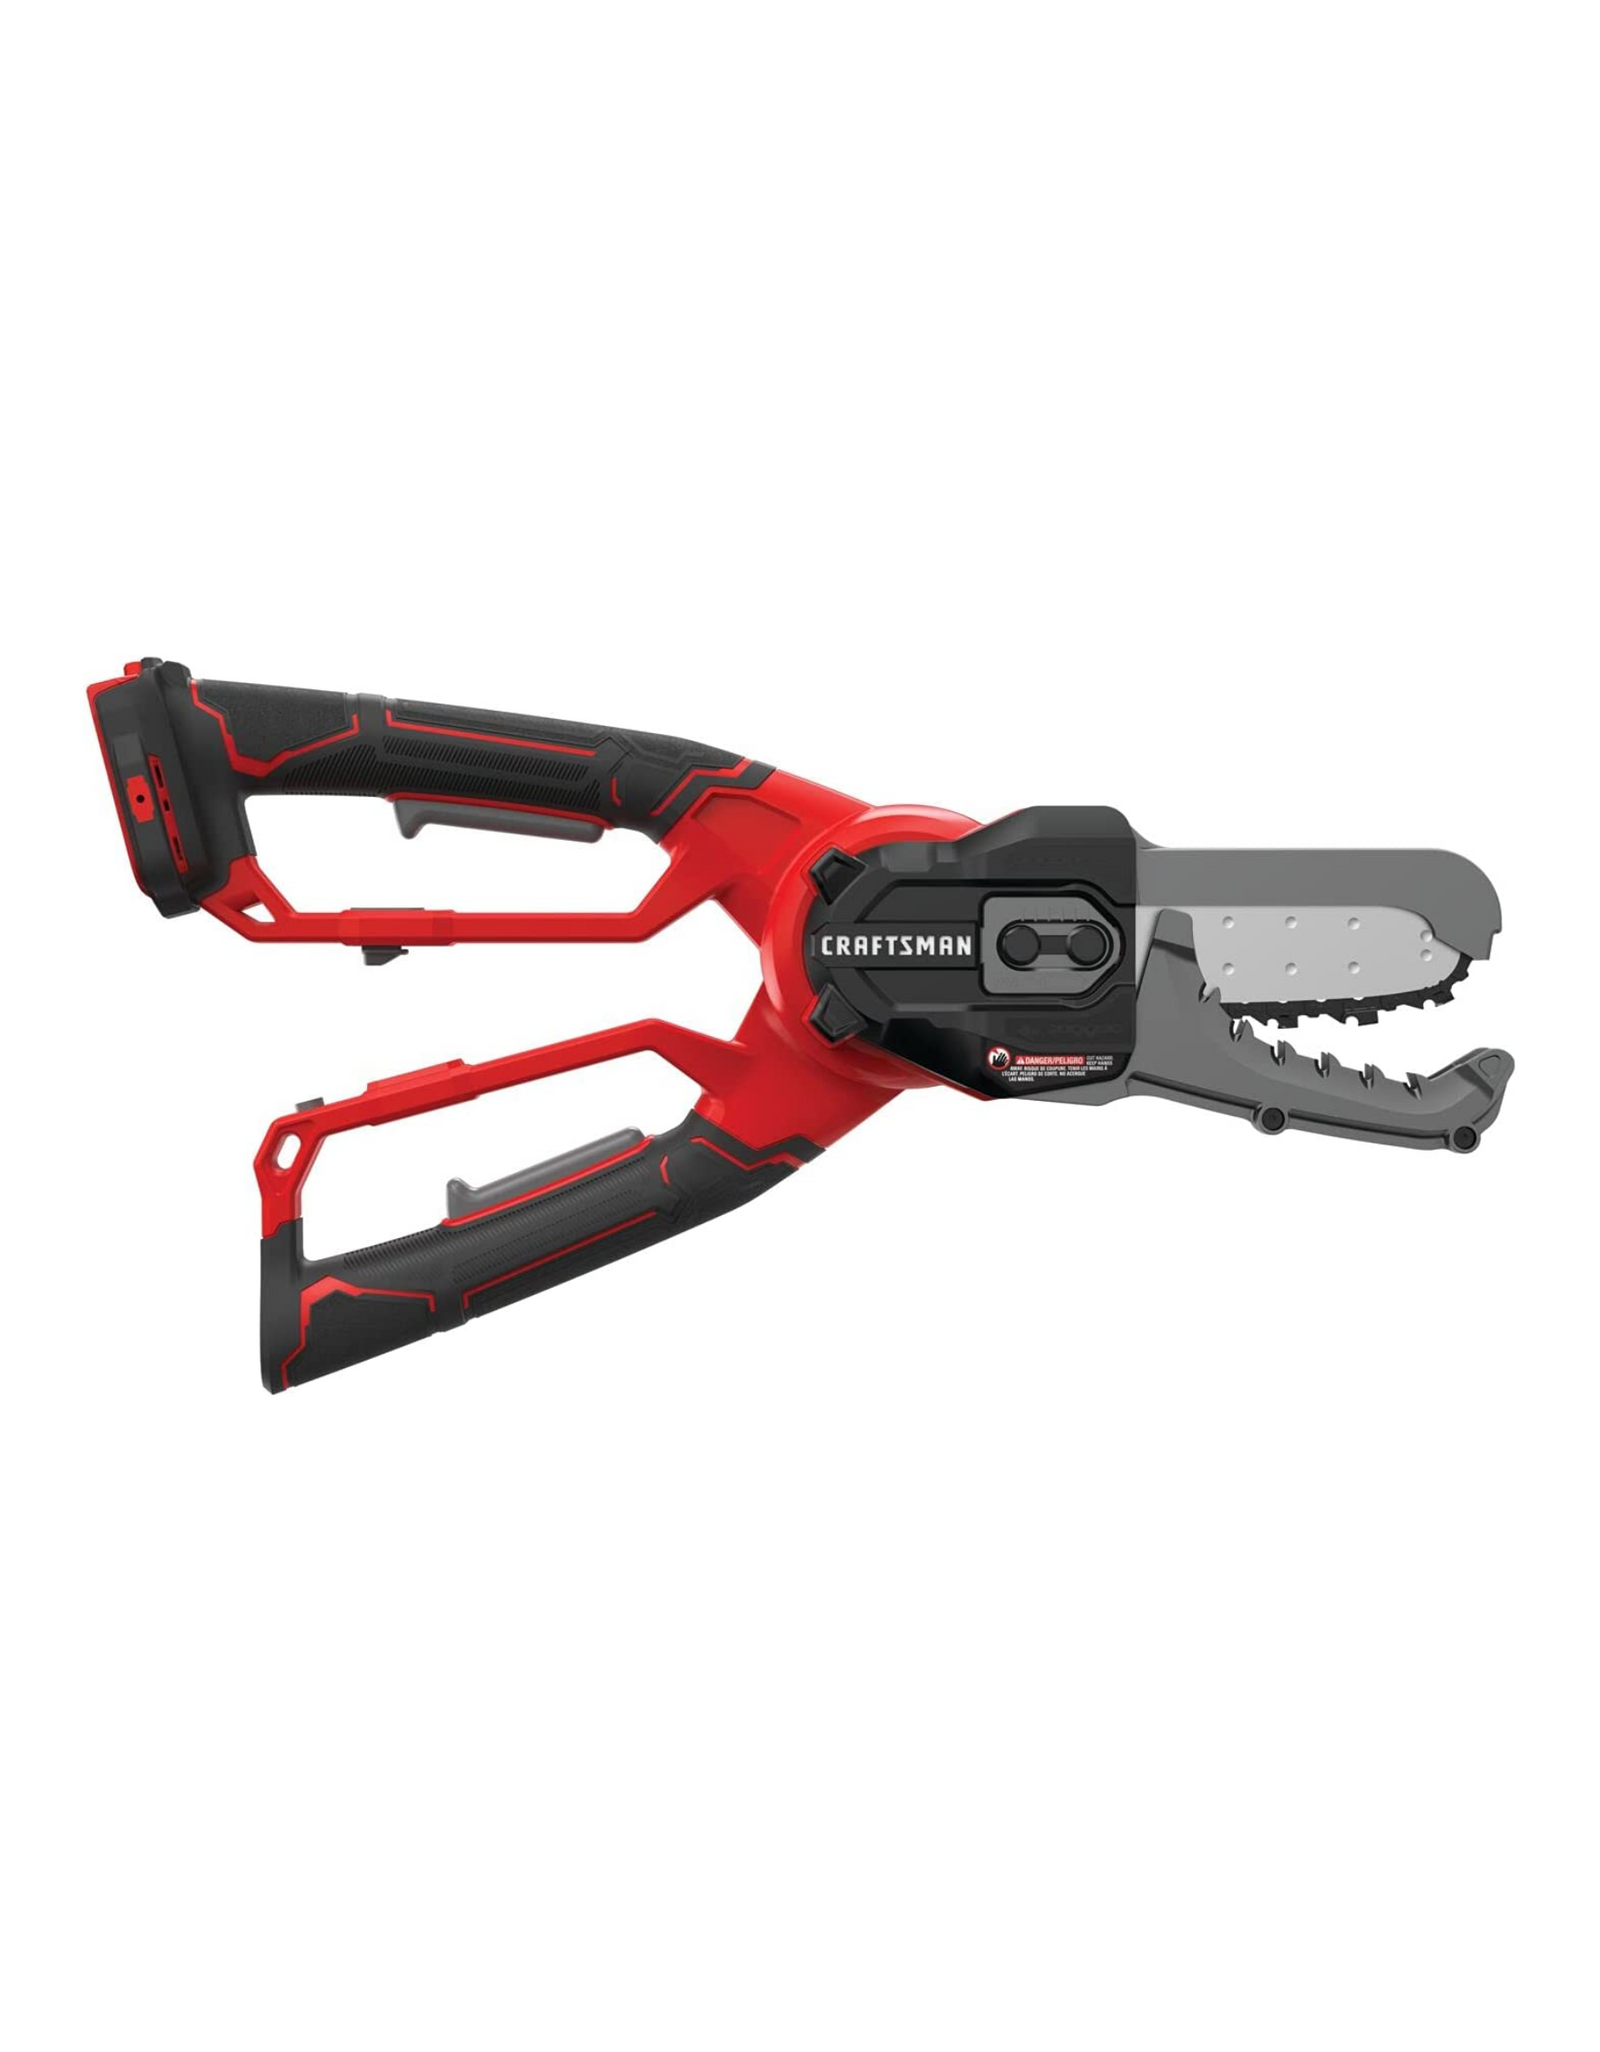 CRAFTSMAN CMCCSL621B Power Lopper, Red (Tool Only)